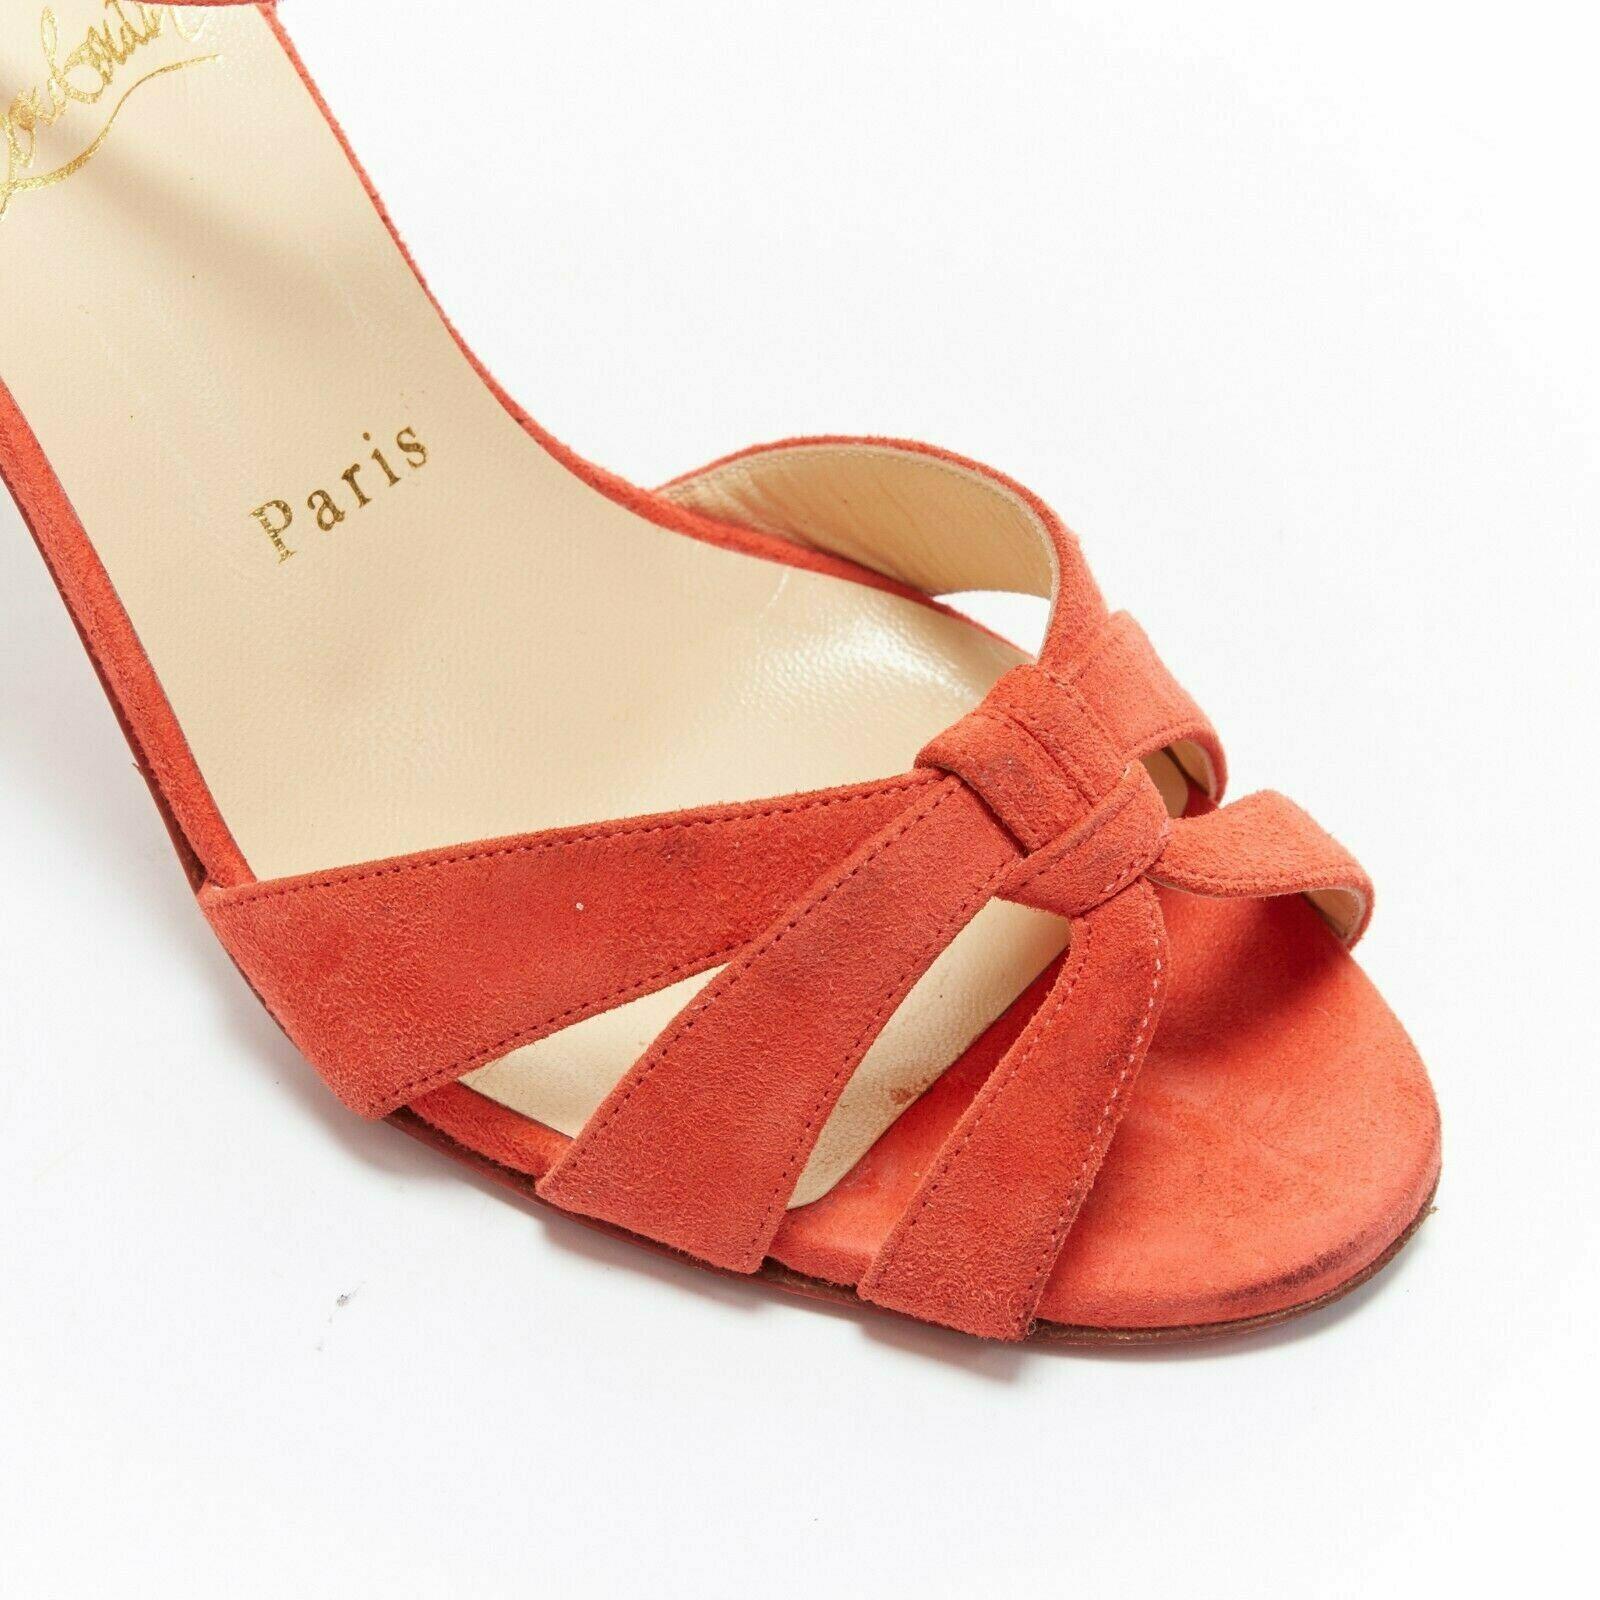 CHRISTIAN LOUBOUTIN red suede strappy ankle strap curved mid heel sandals EU37 1